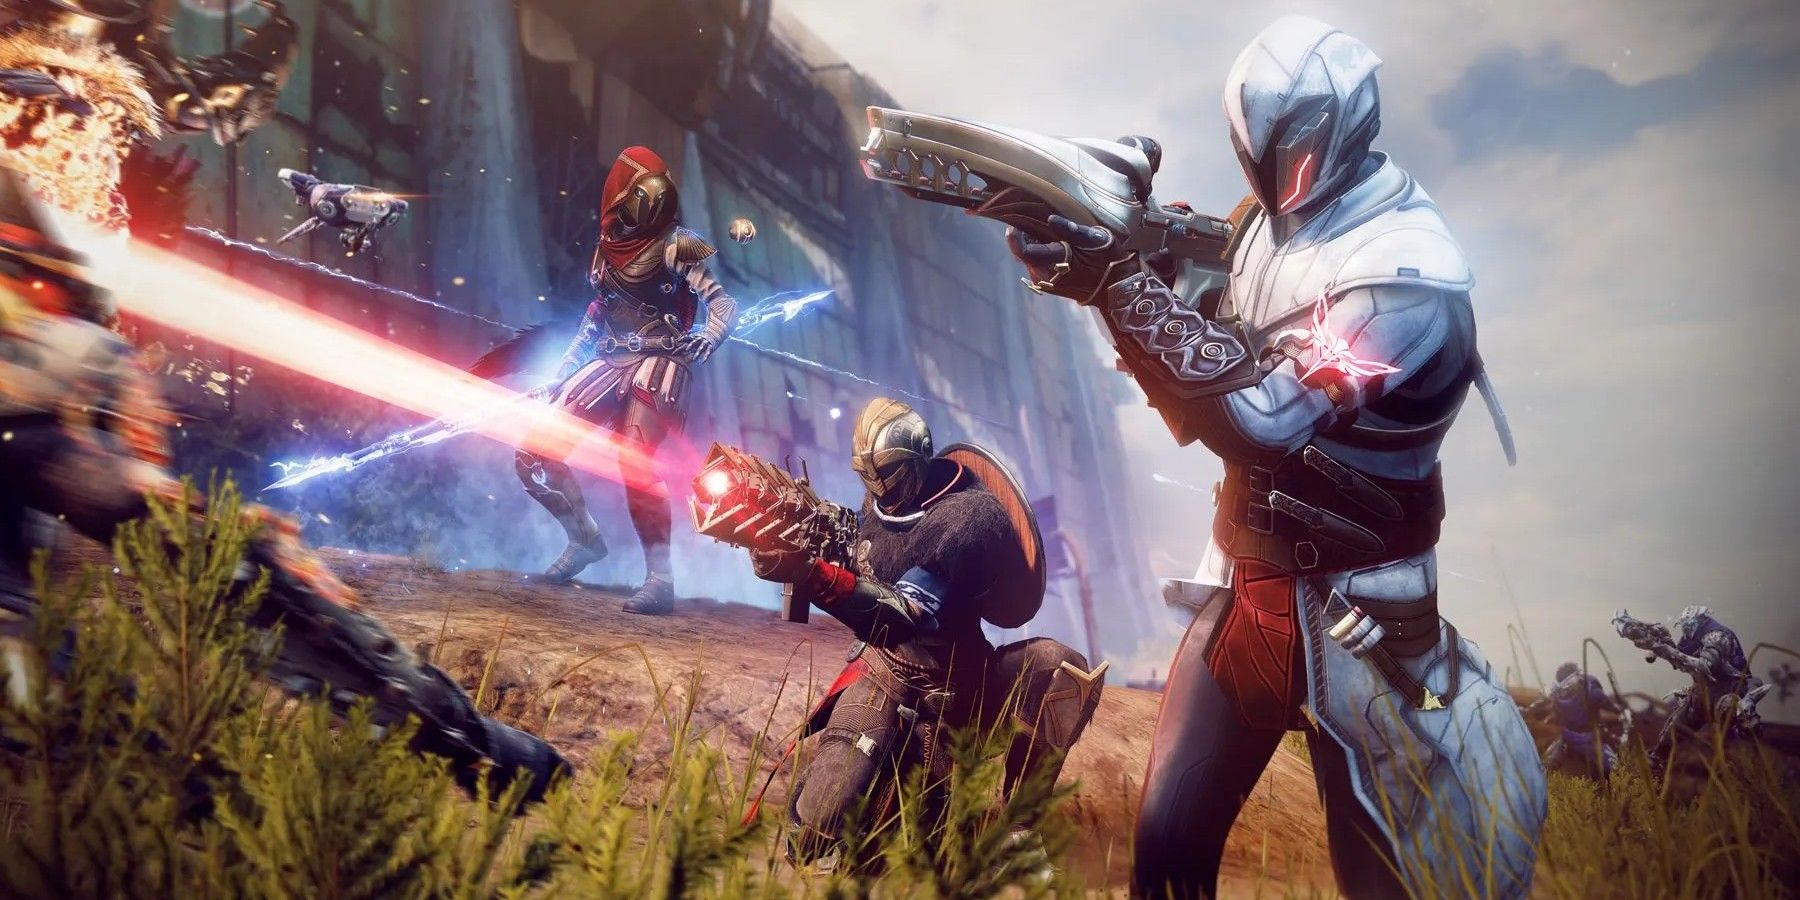 Destiny 2 Cross-Over Event With Assassin's Creed Gameplay Screenshot